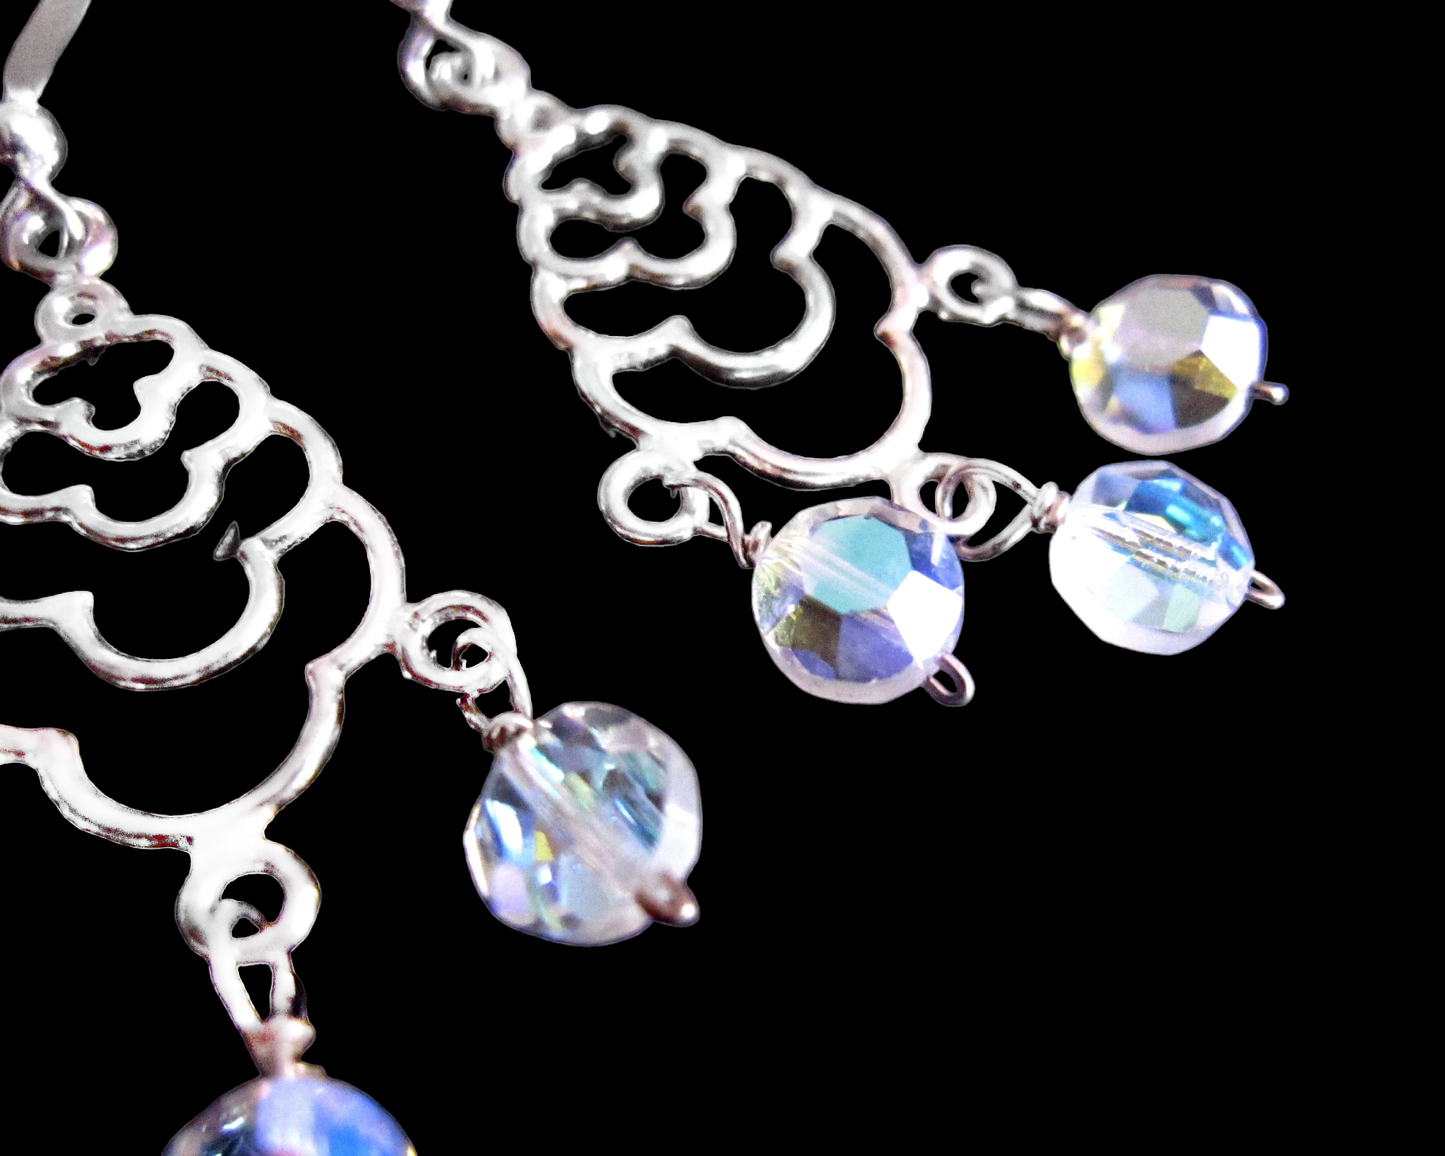 Art Deco Style Long Sterling Silver Chandelier Earrings with three dangly faceted coin shaped Clear AB crystals. The earing are dangling on French earring wires.